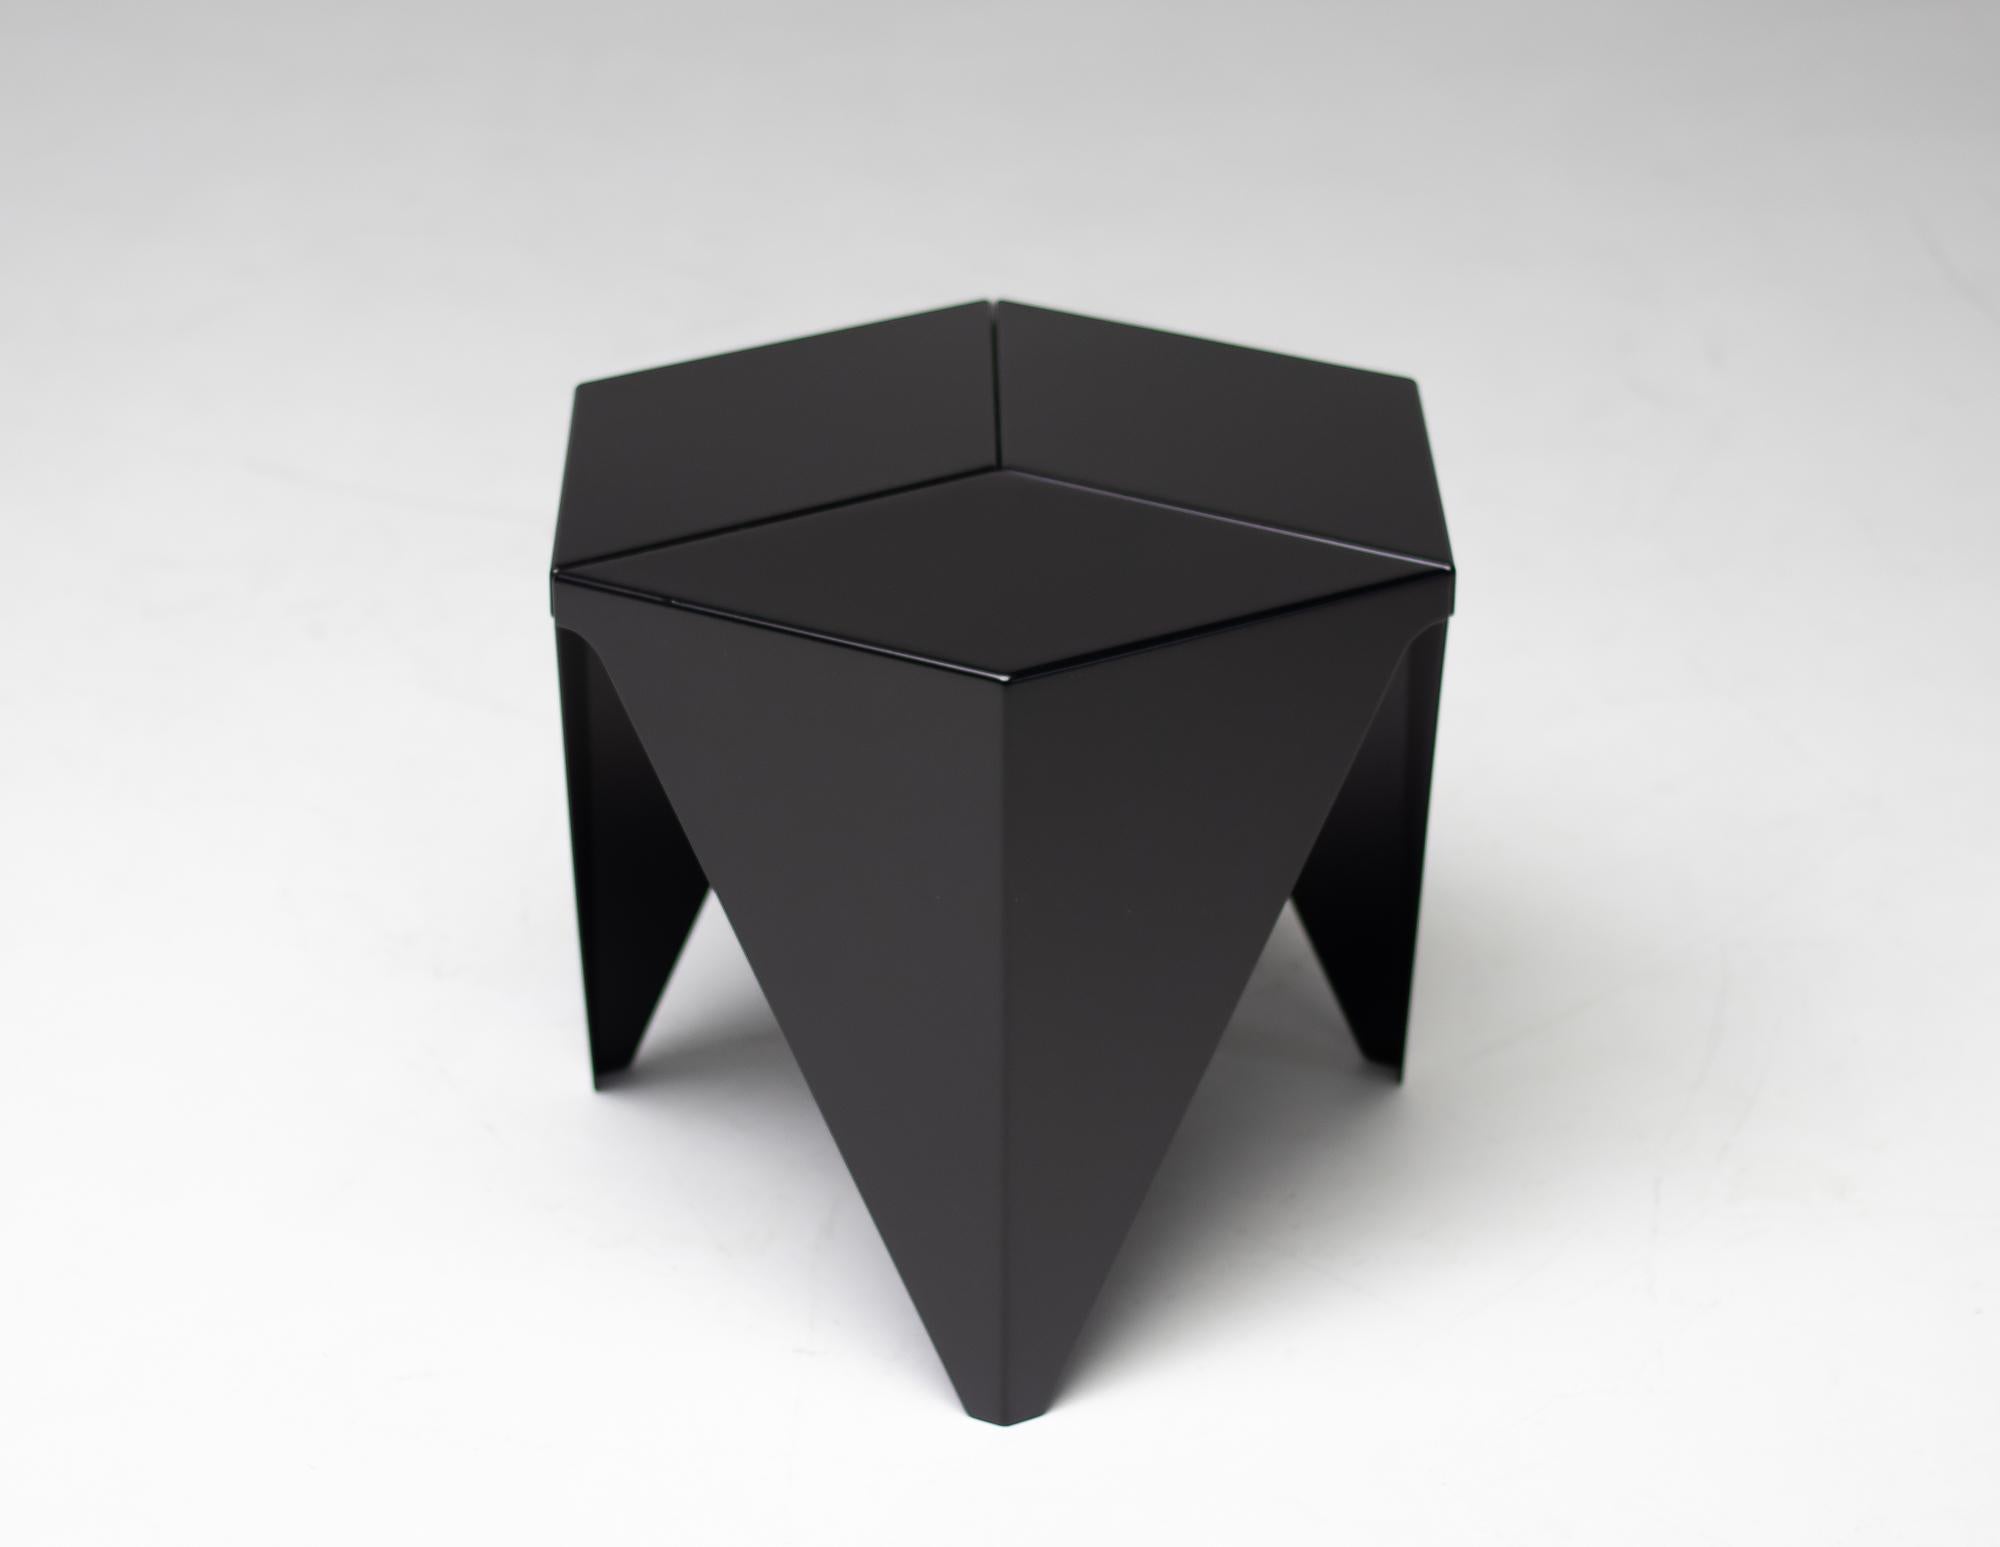 A Prismatic table in black by Isamu Noguchi for Vitra. The table design was based on geometric forms and has an interesting three-legged base with a hexagonal top. Made of folded sheet aluminium inspired by Japanese paper folding techniques.